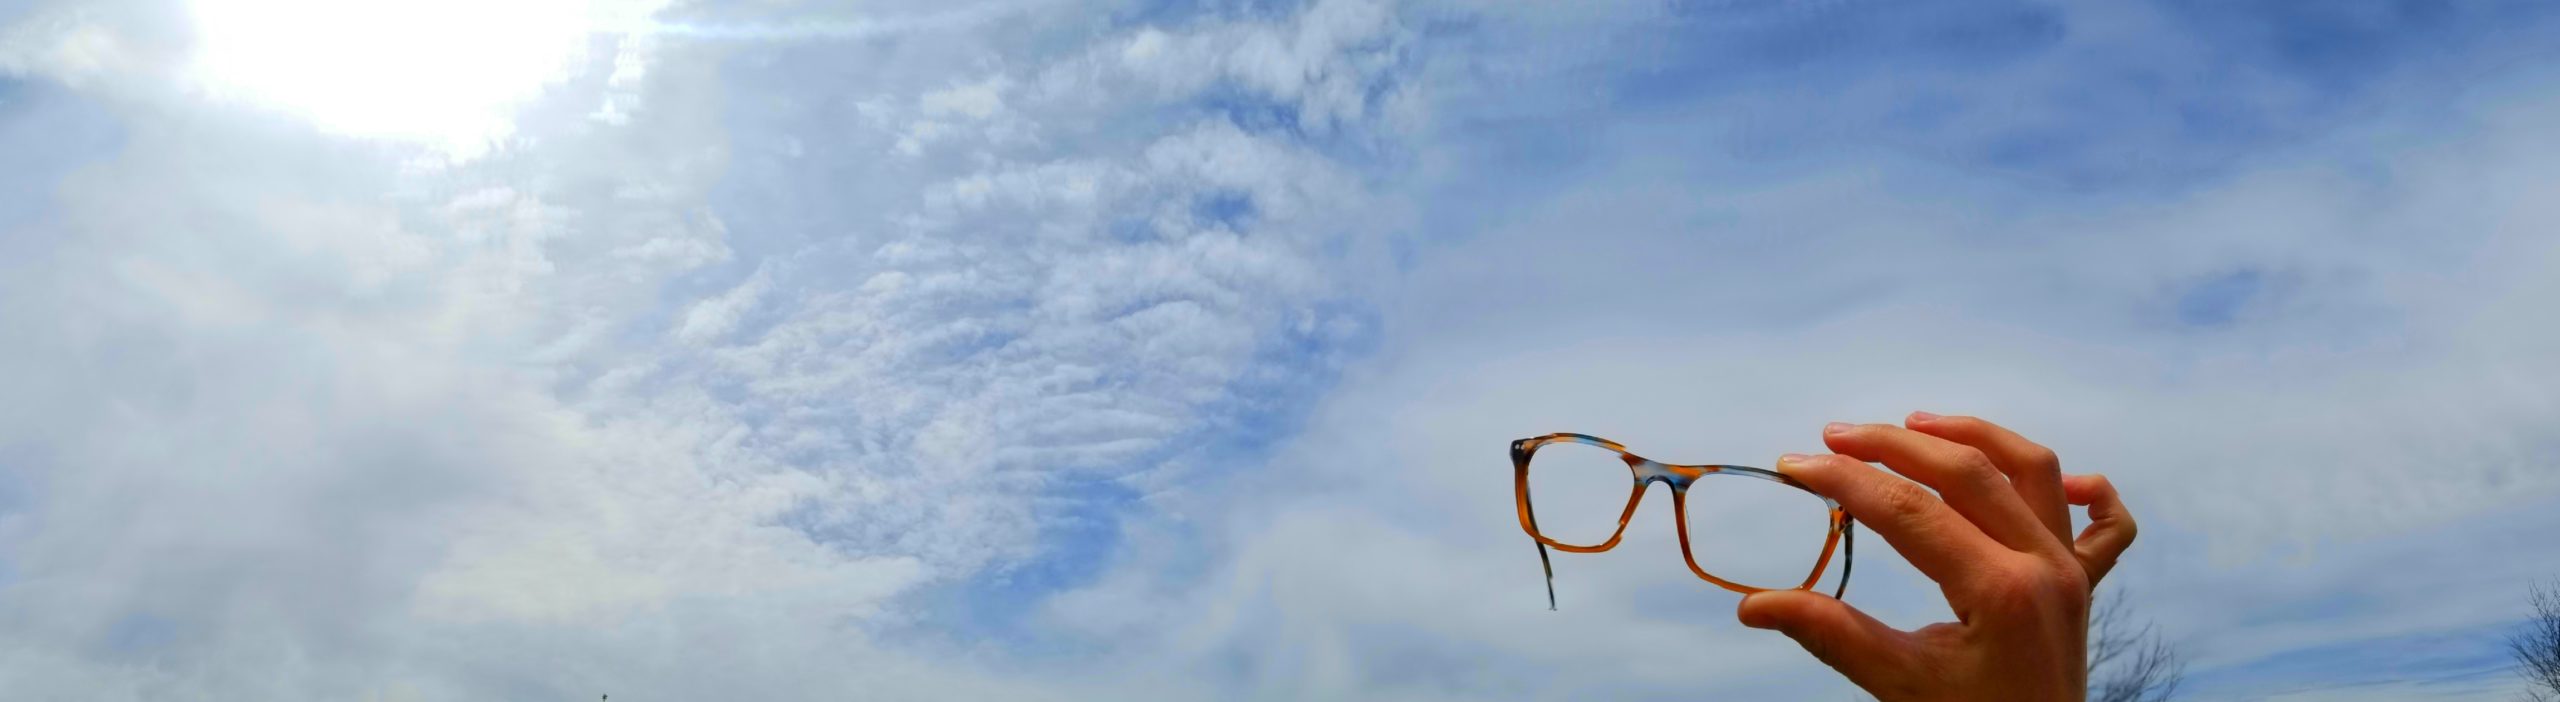 Clouds and Glasses